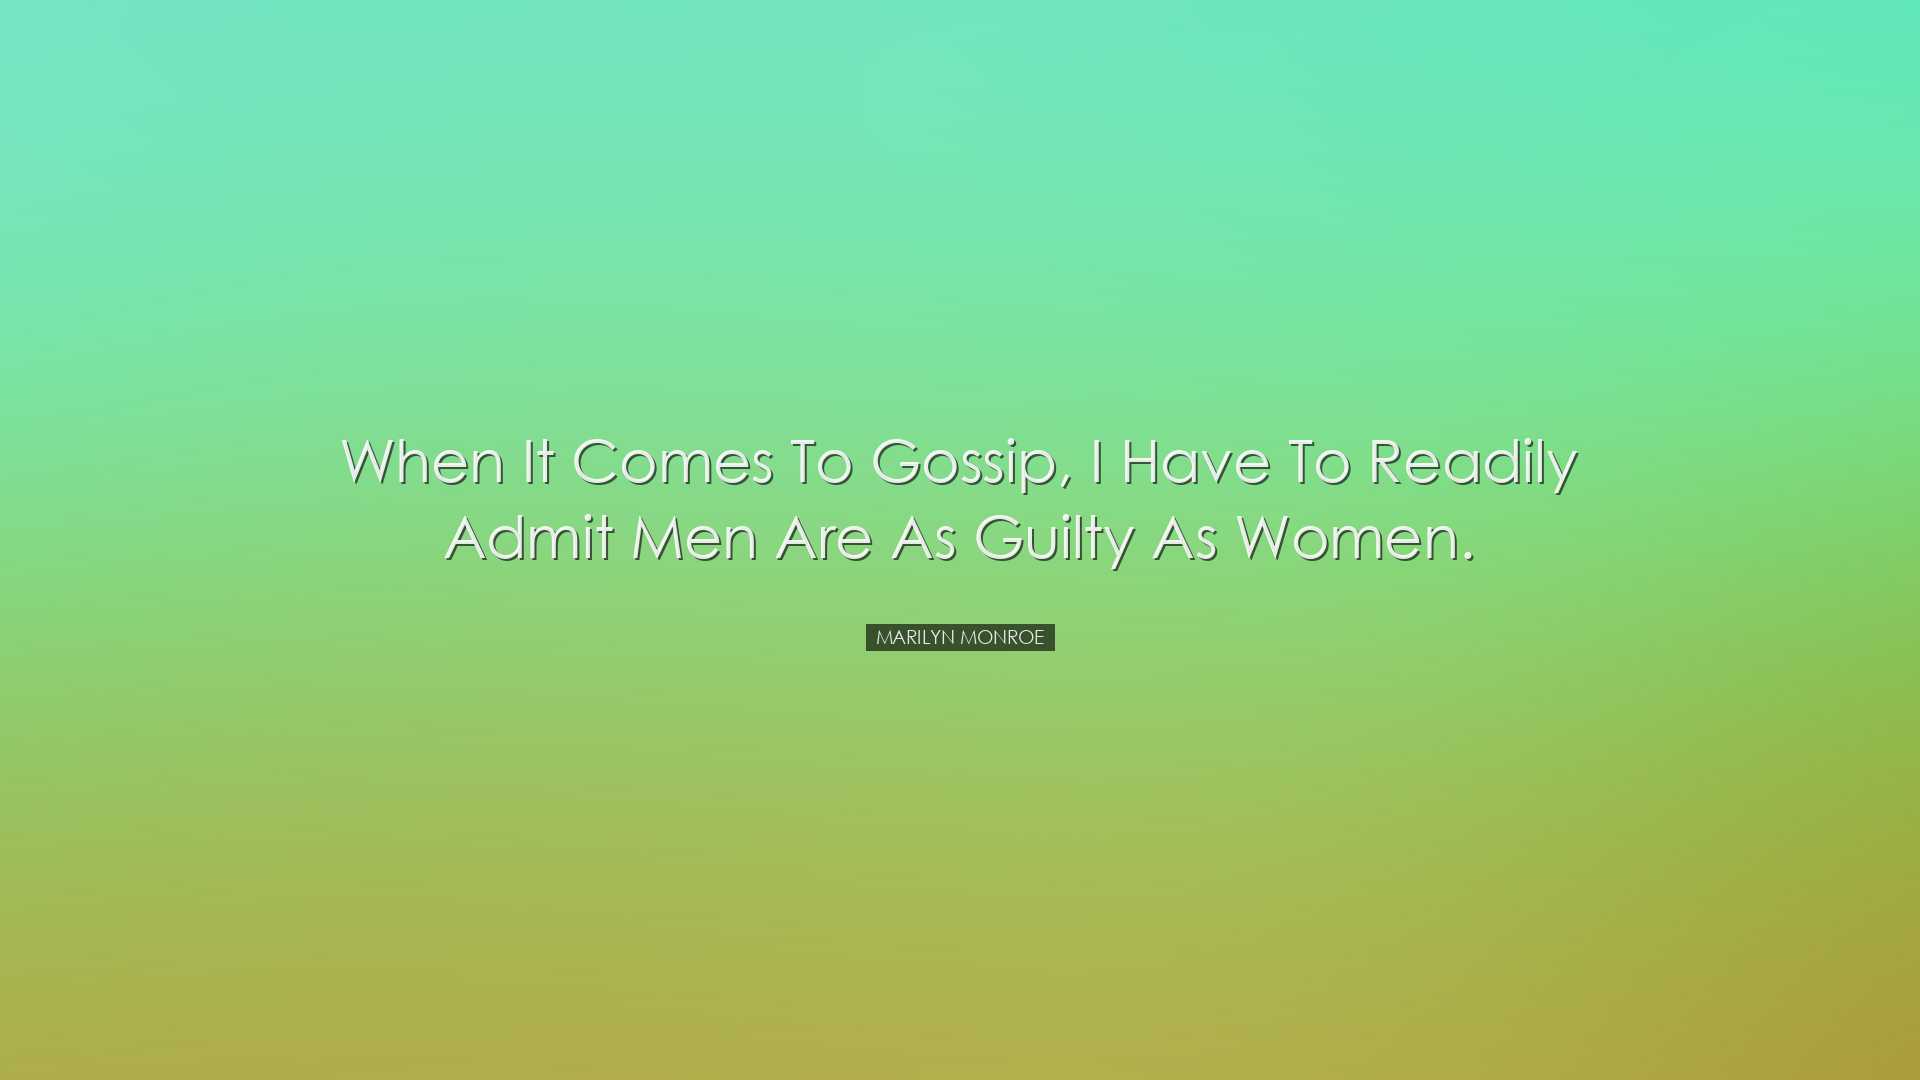 When it comes to gossip, I have to readily admit men are as guilty